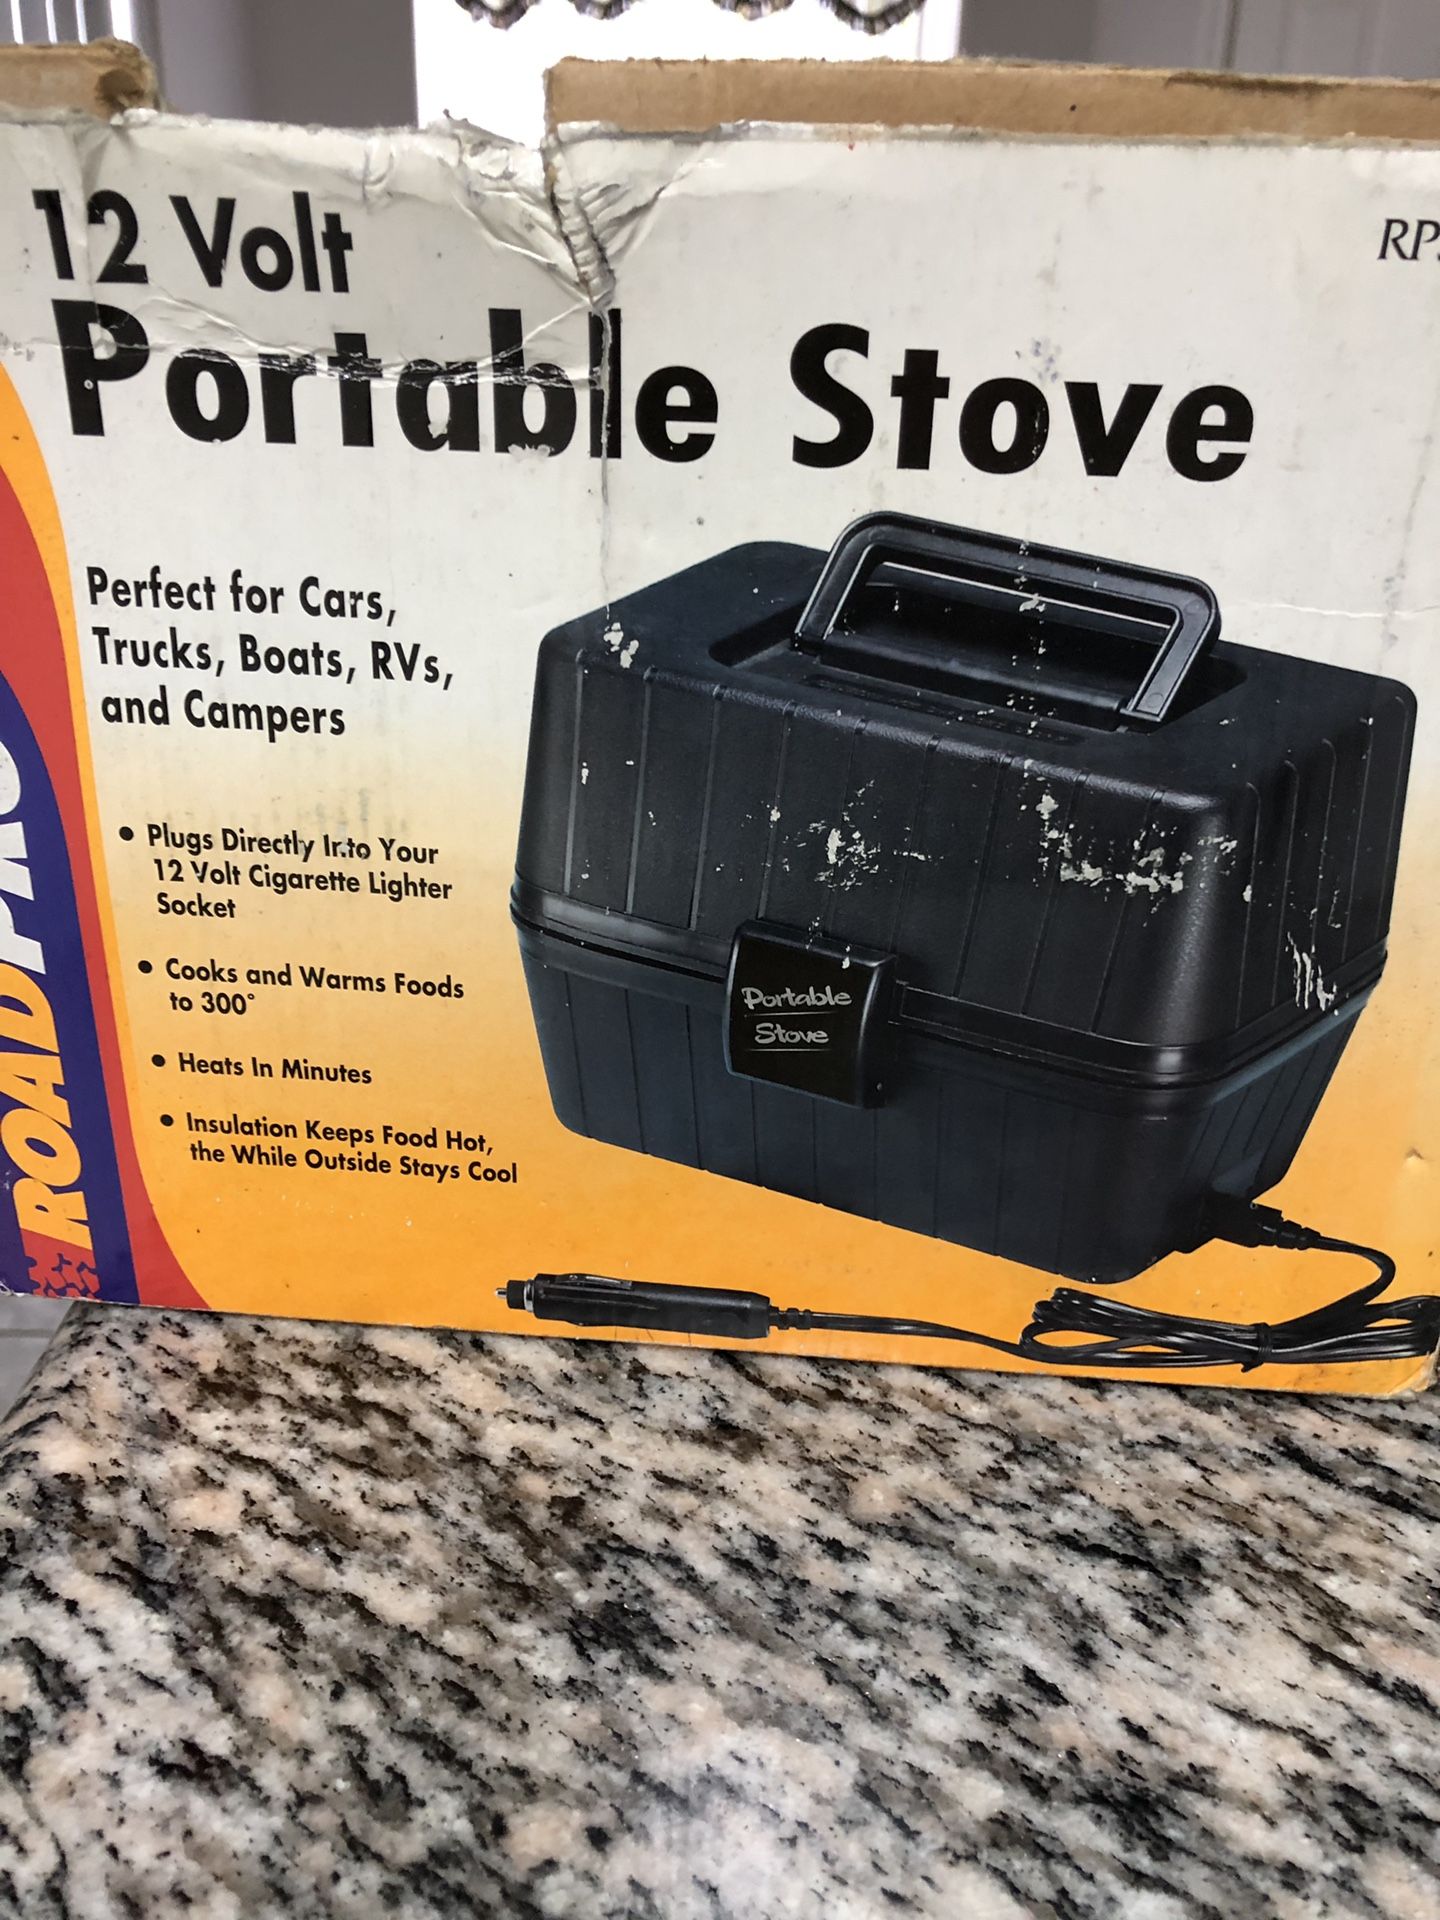 12Volt portable stove perfect for cars trucks boats, RVs and campers. Cooks and warms food to 300 “